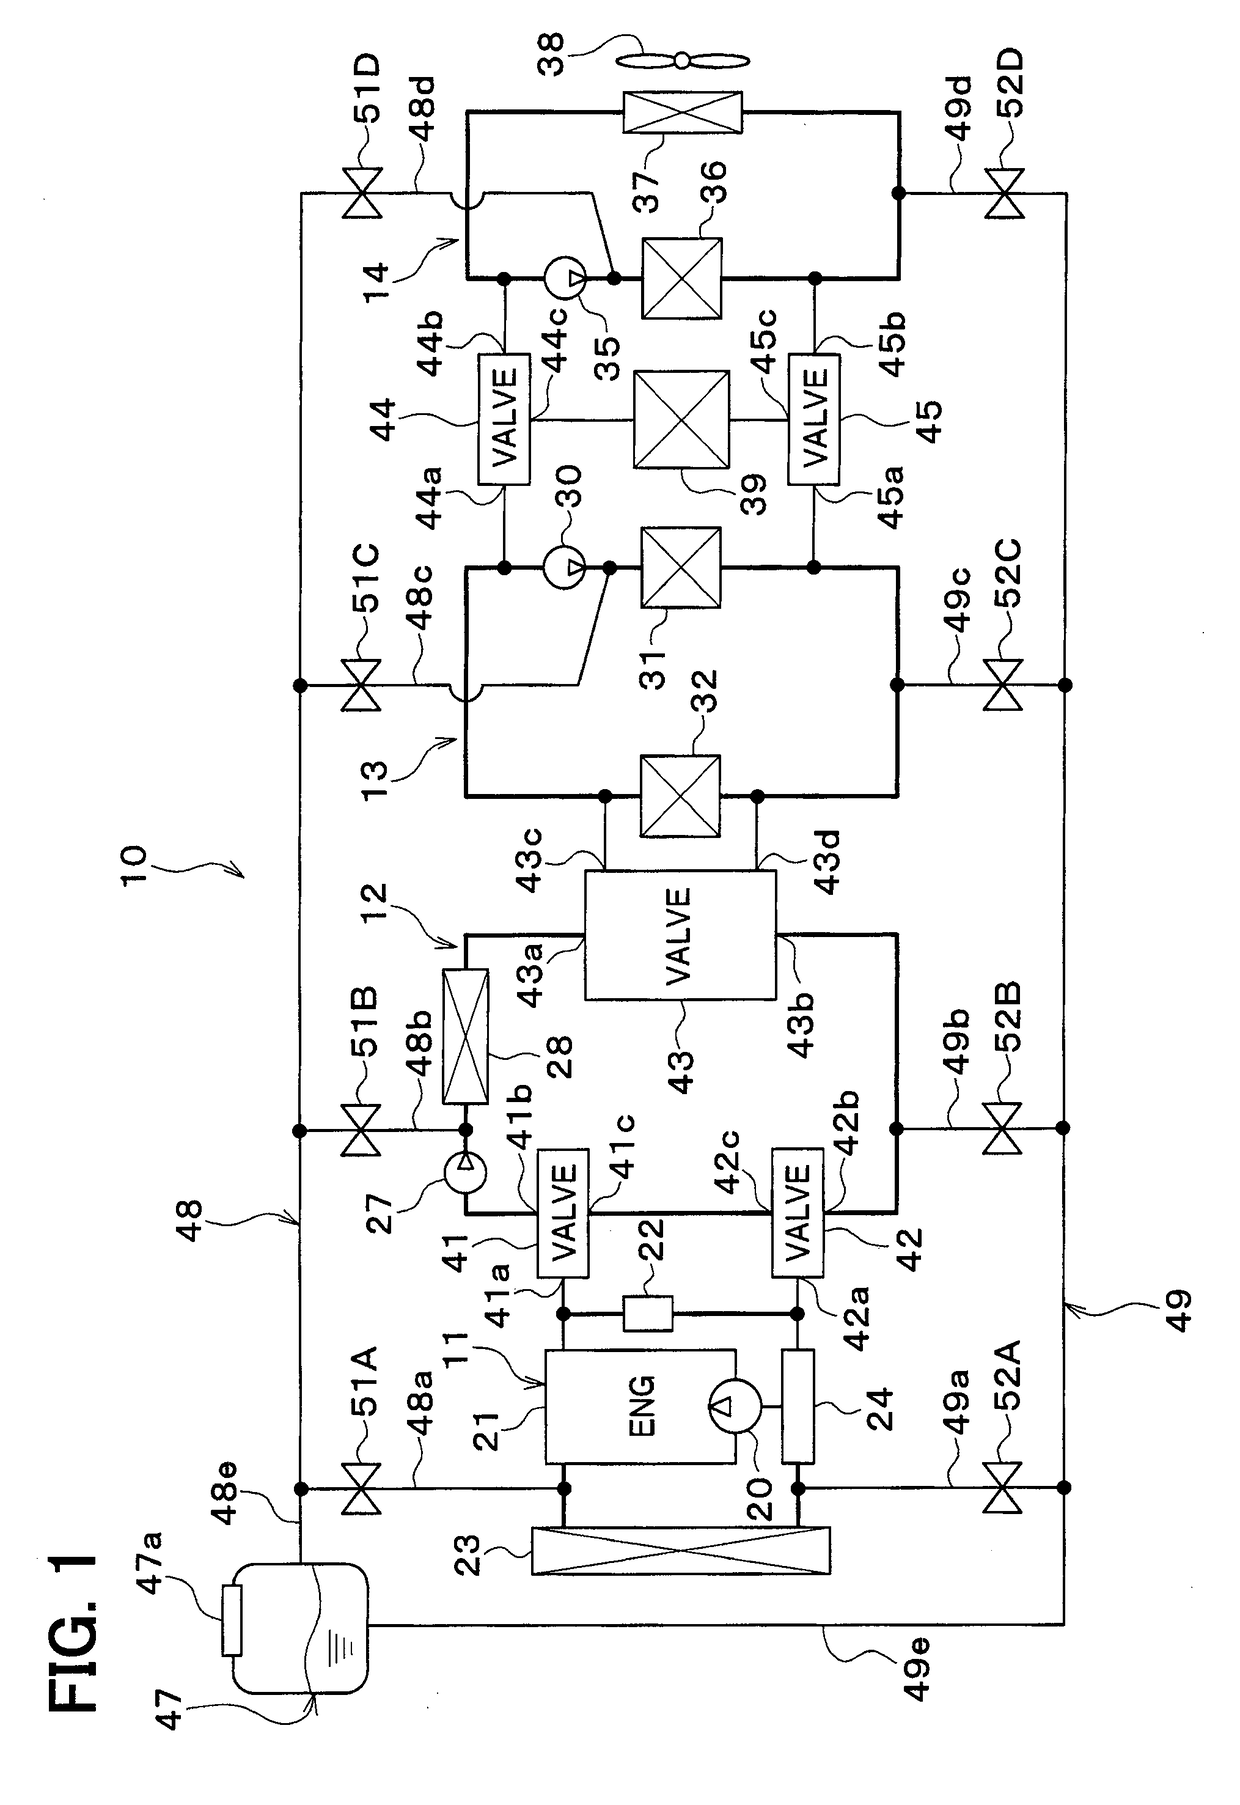 Thermal management device for vehicle